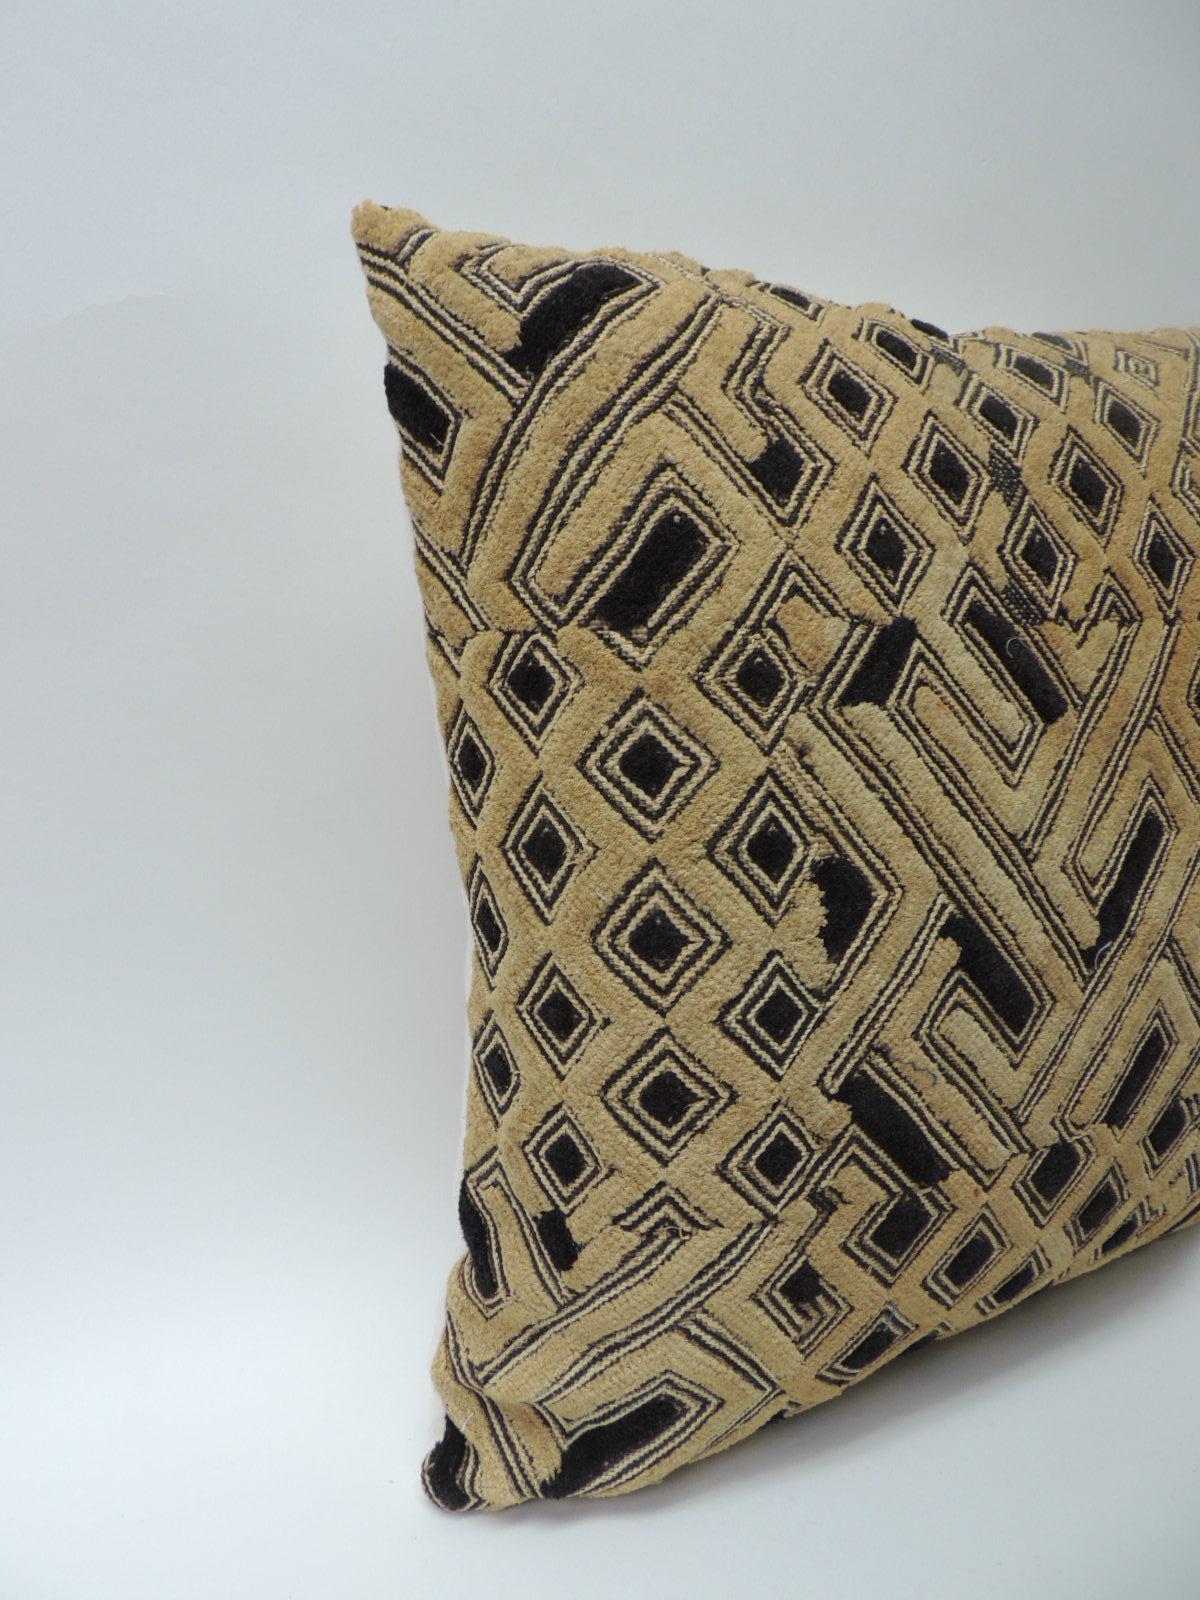 Antique raffia velvet tribal cut-pile square design handwoven pillow. Intricate tribal patterns in shades of tan, black and brown with natural linen backings. Decorative pillow designed and handcrafted in the USA. handstitched closure (no zipper.)